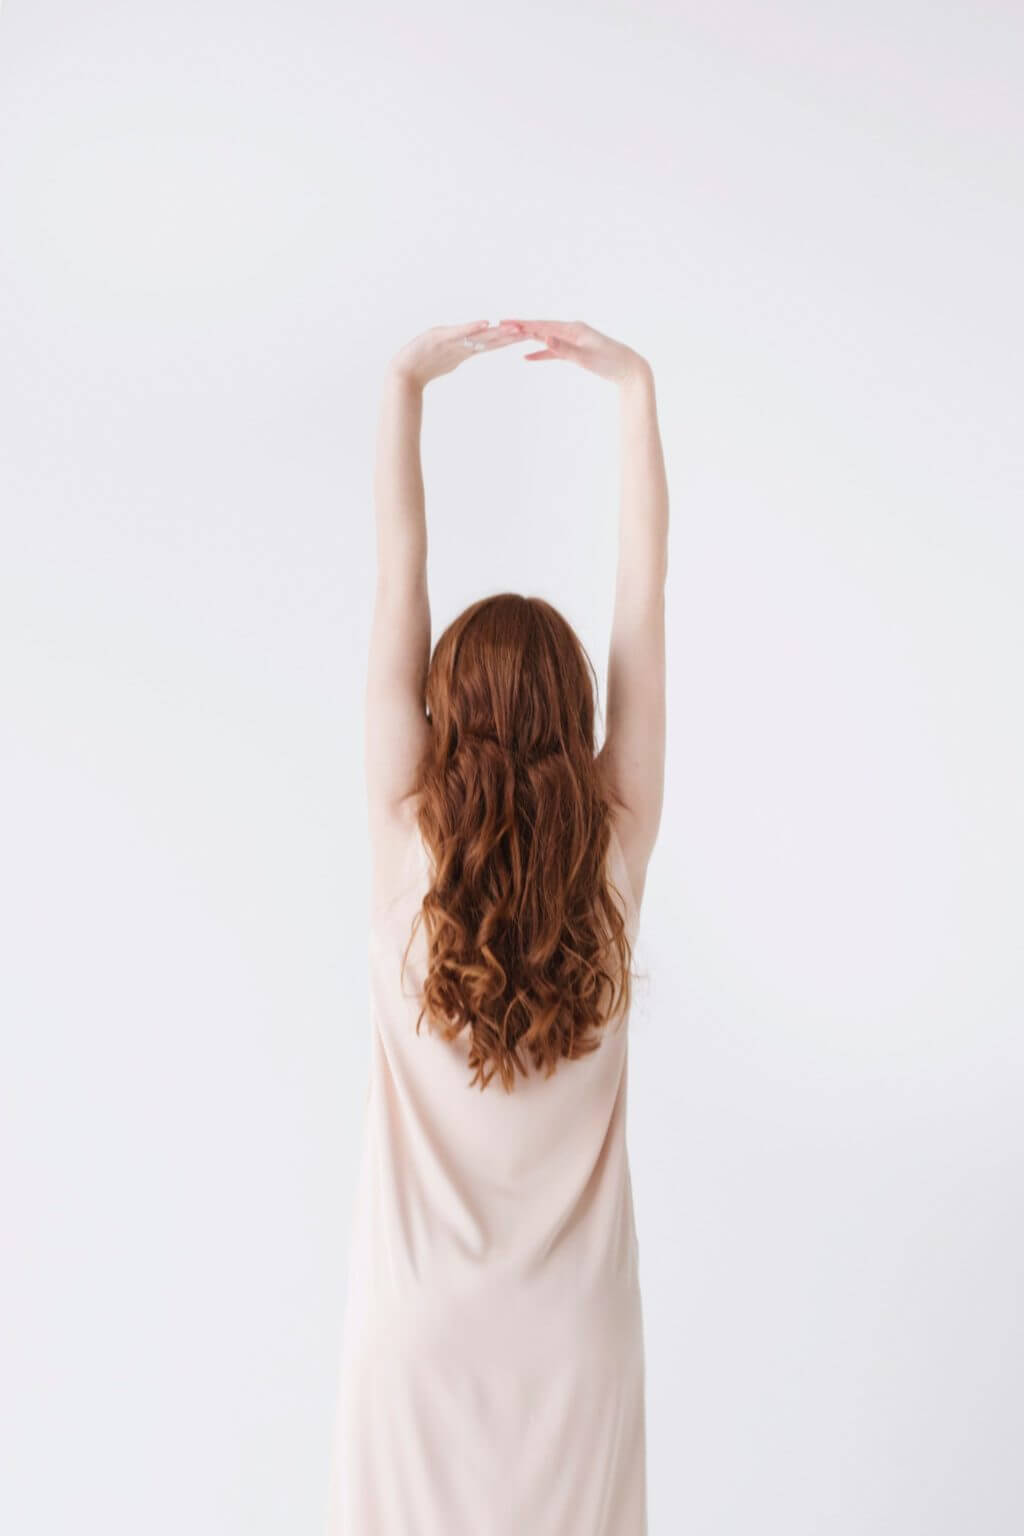 Woman in front of a white wall stretching her arms and back